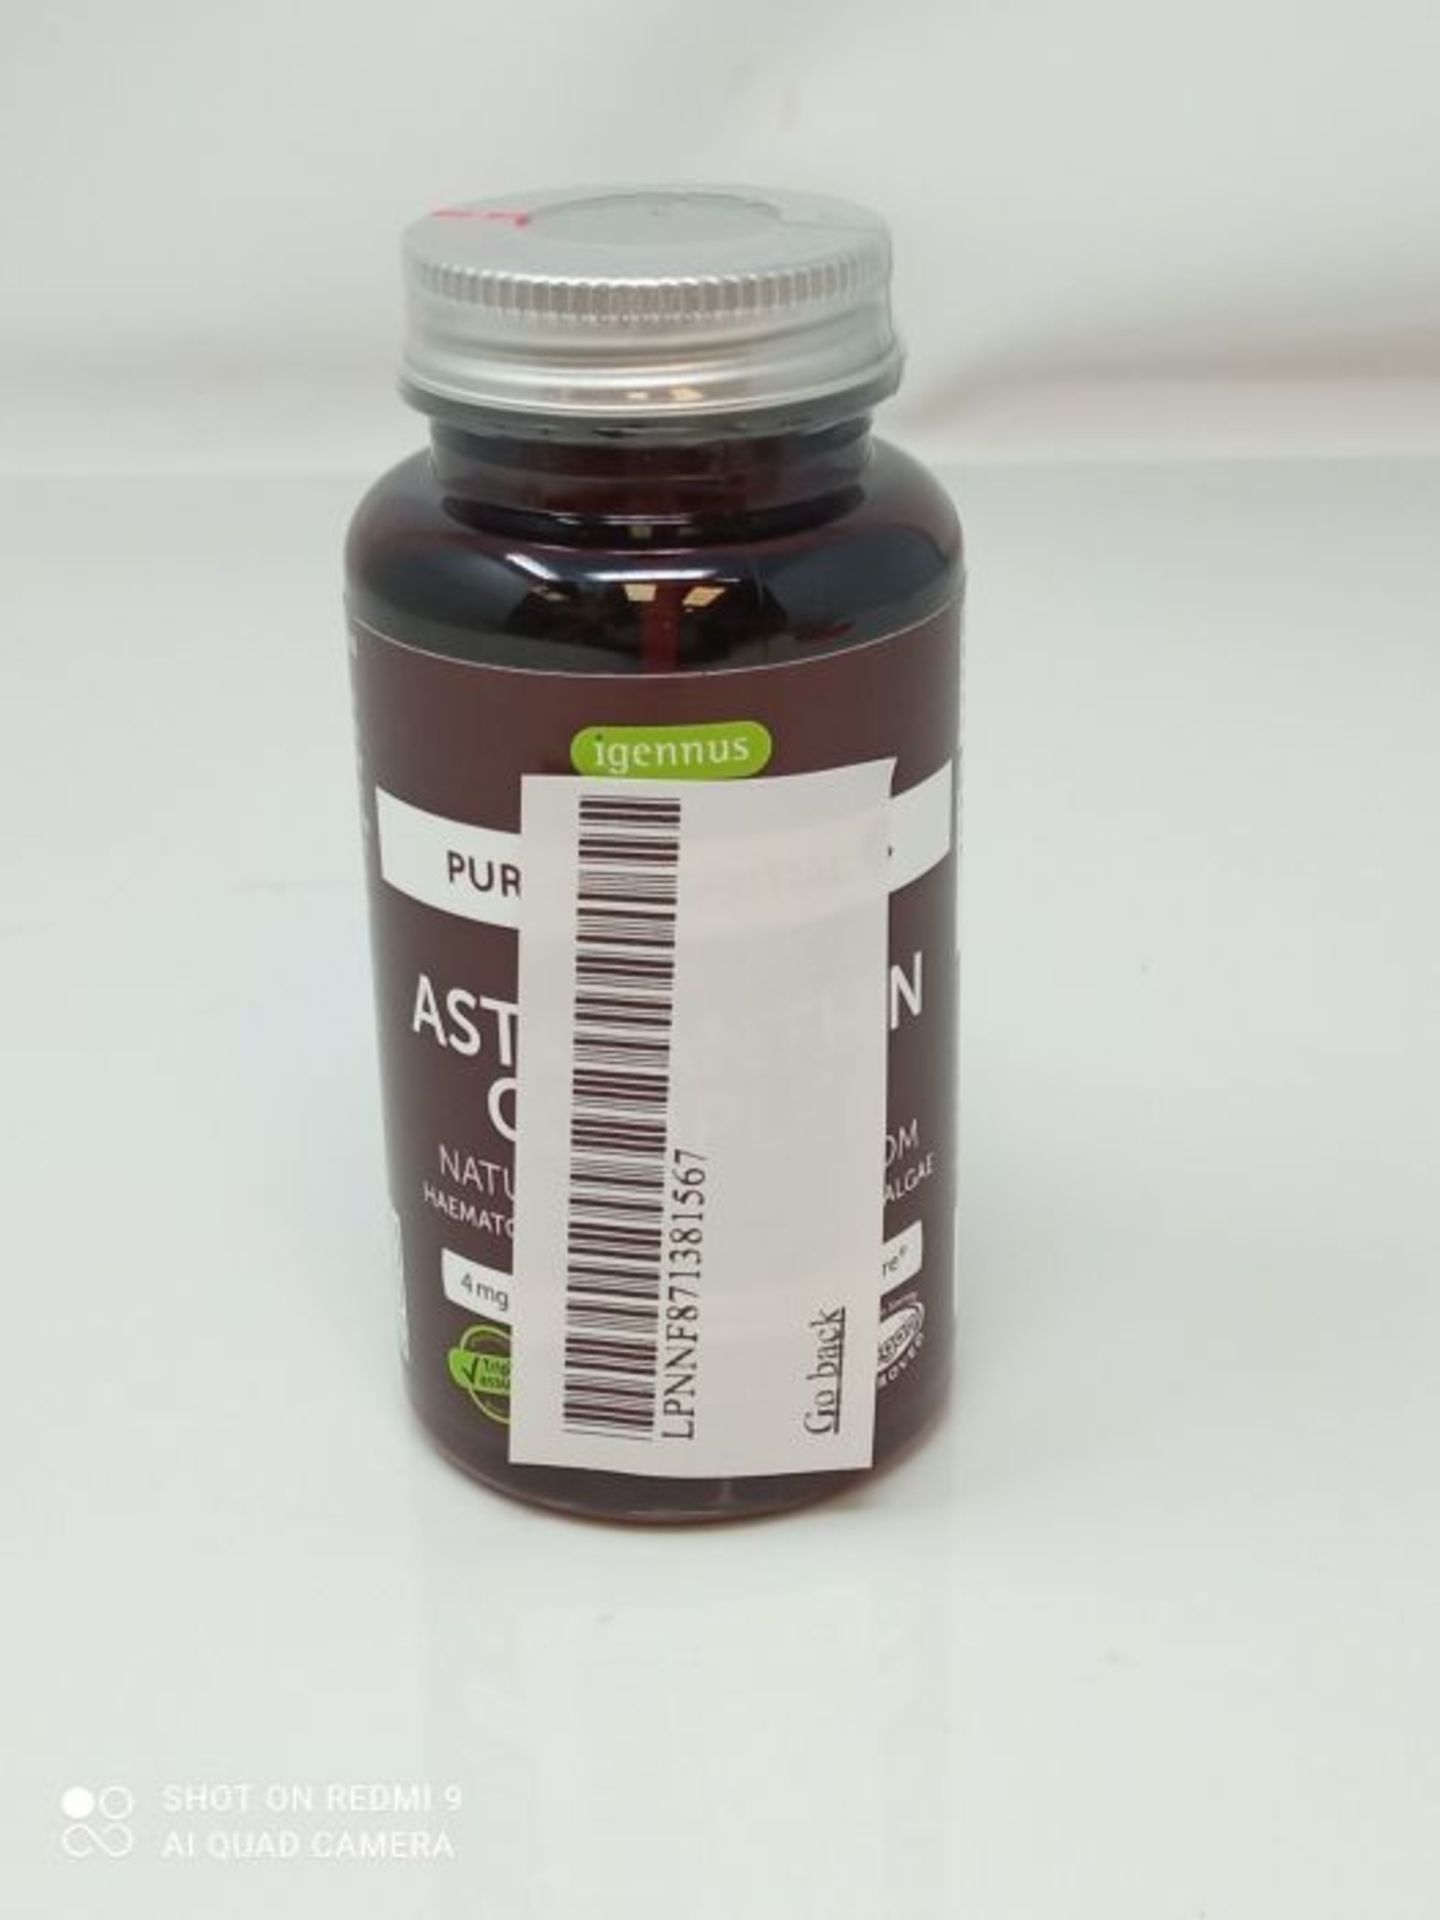 Pure & Essential Astaxanthin Complex, 42 mg Astapure Providing 4 mg H. Pluvialis Astax - Image 2 of 3